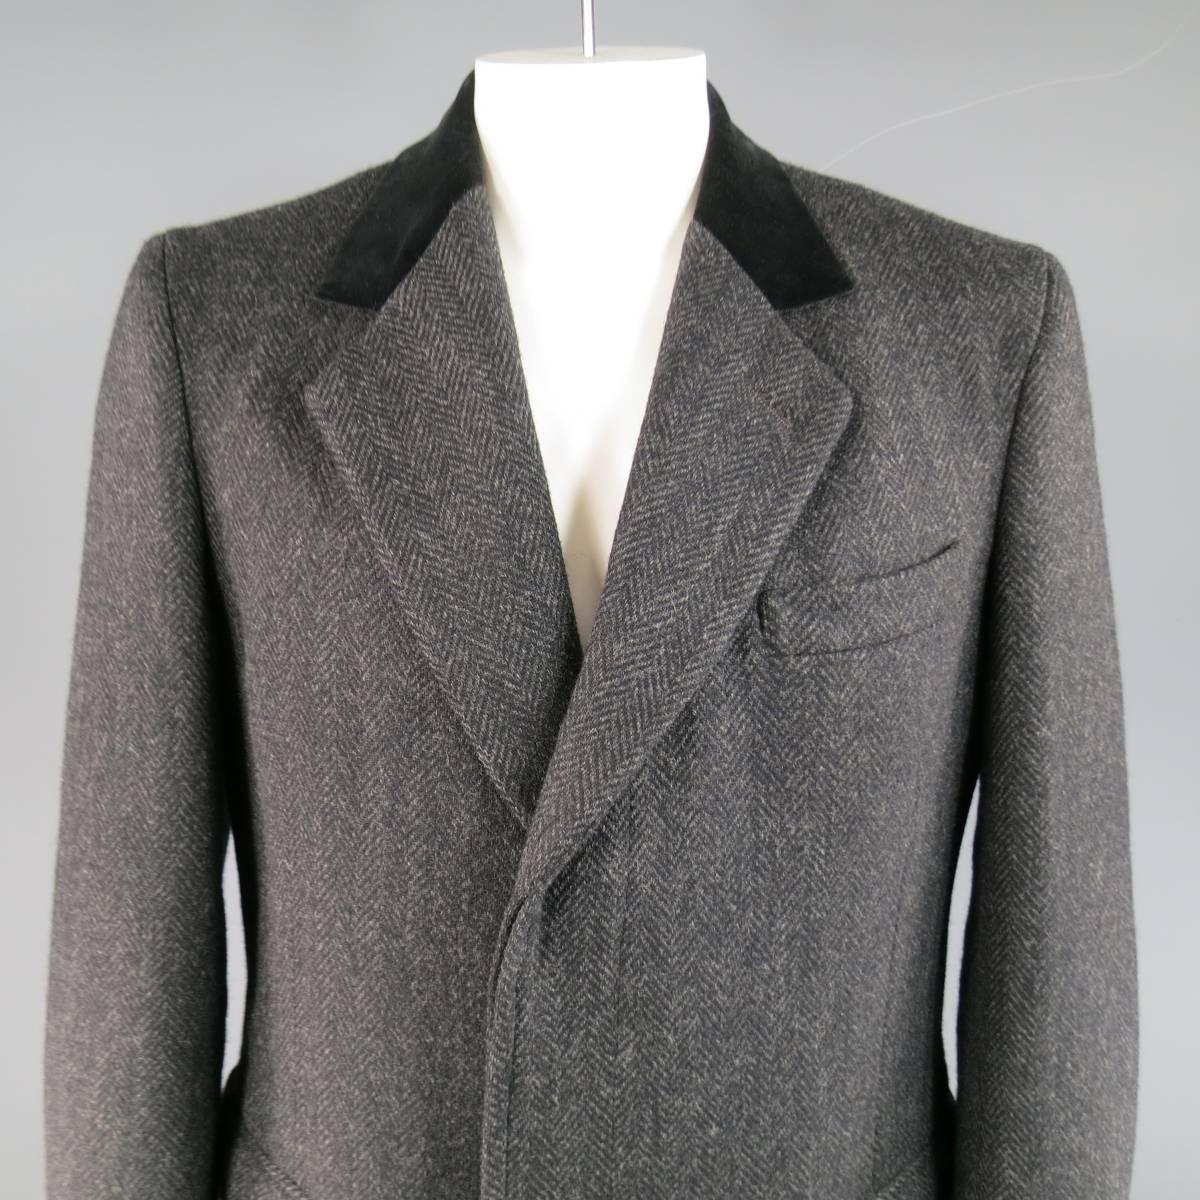 Classic winter coat by BARNEY'S NEW  YORK in a charcoal gray Herringbone print heavy wool featuring a notch lapel, black velvet collar, hidden placket button up closure, double flap pockets, and single vented back. Made in USA.
 
Excellent